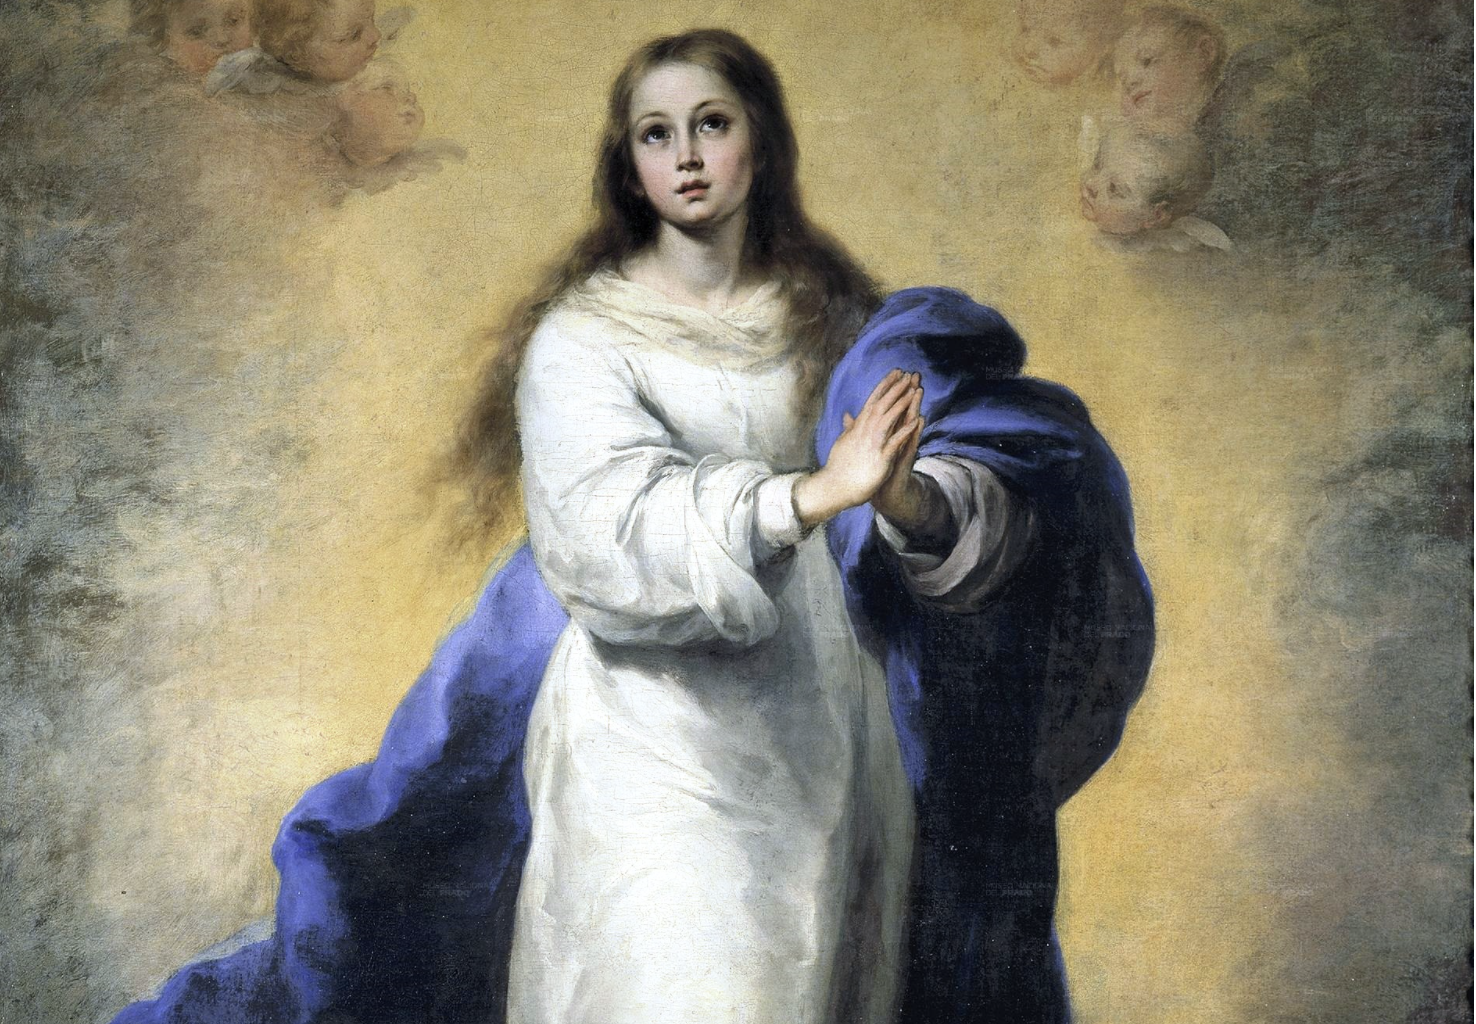 The Immaculate Conception of El Escorial (1660–1665) by Bartolomé Esteban Murillo - Public Domain Catholic Painting